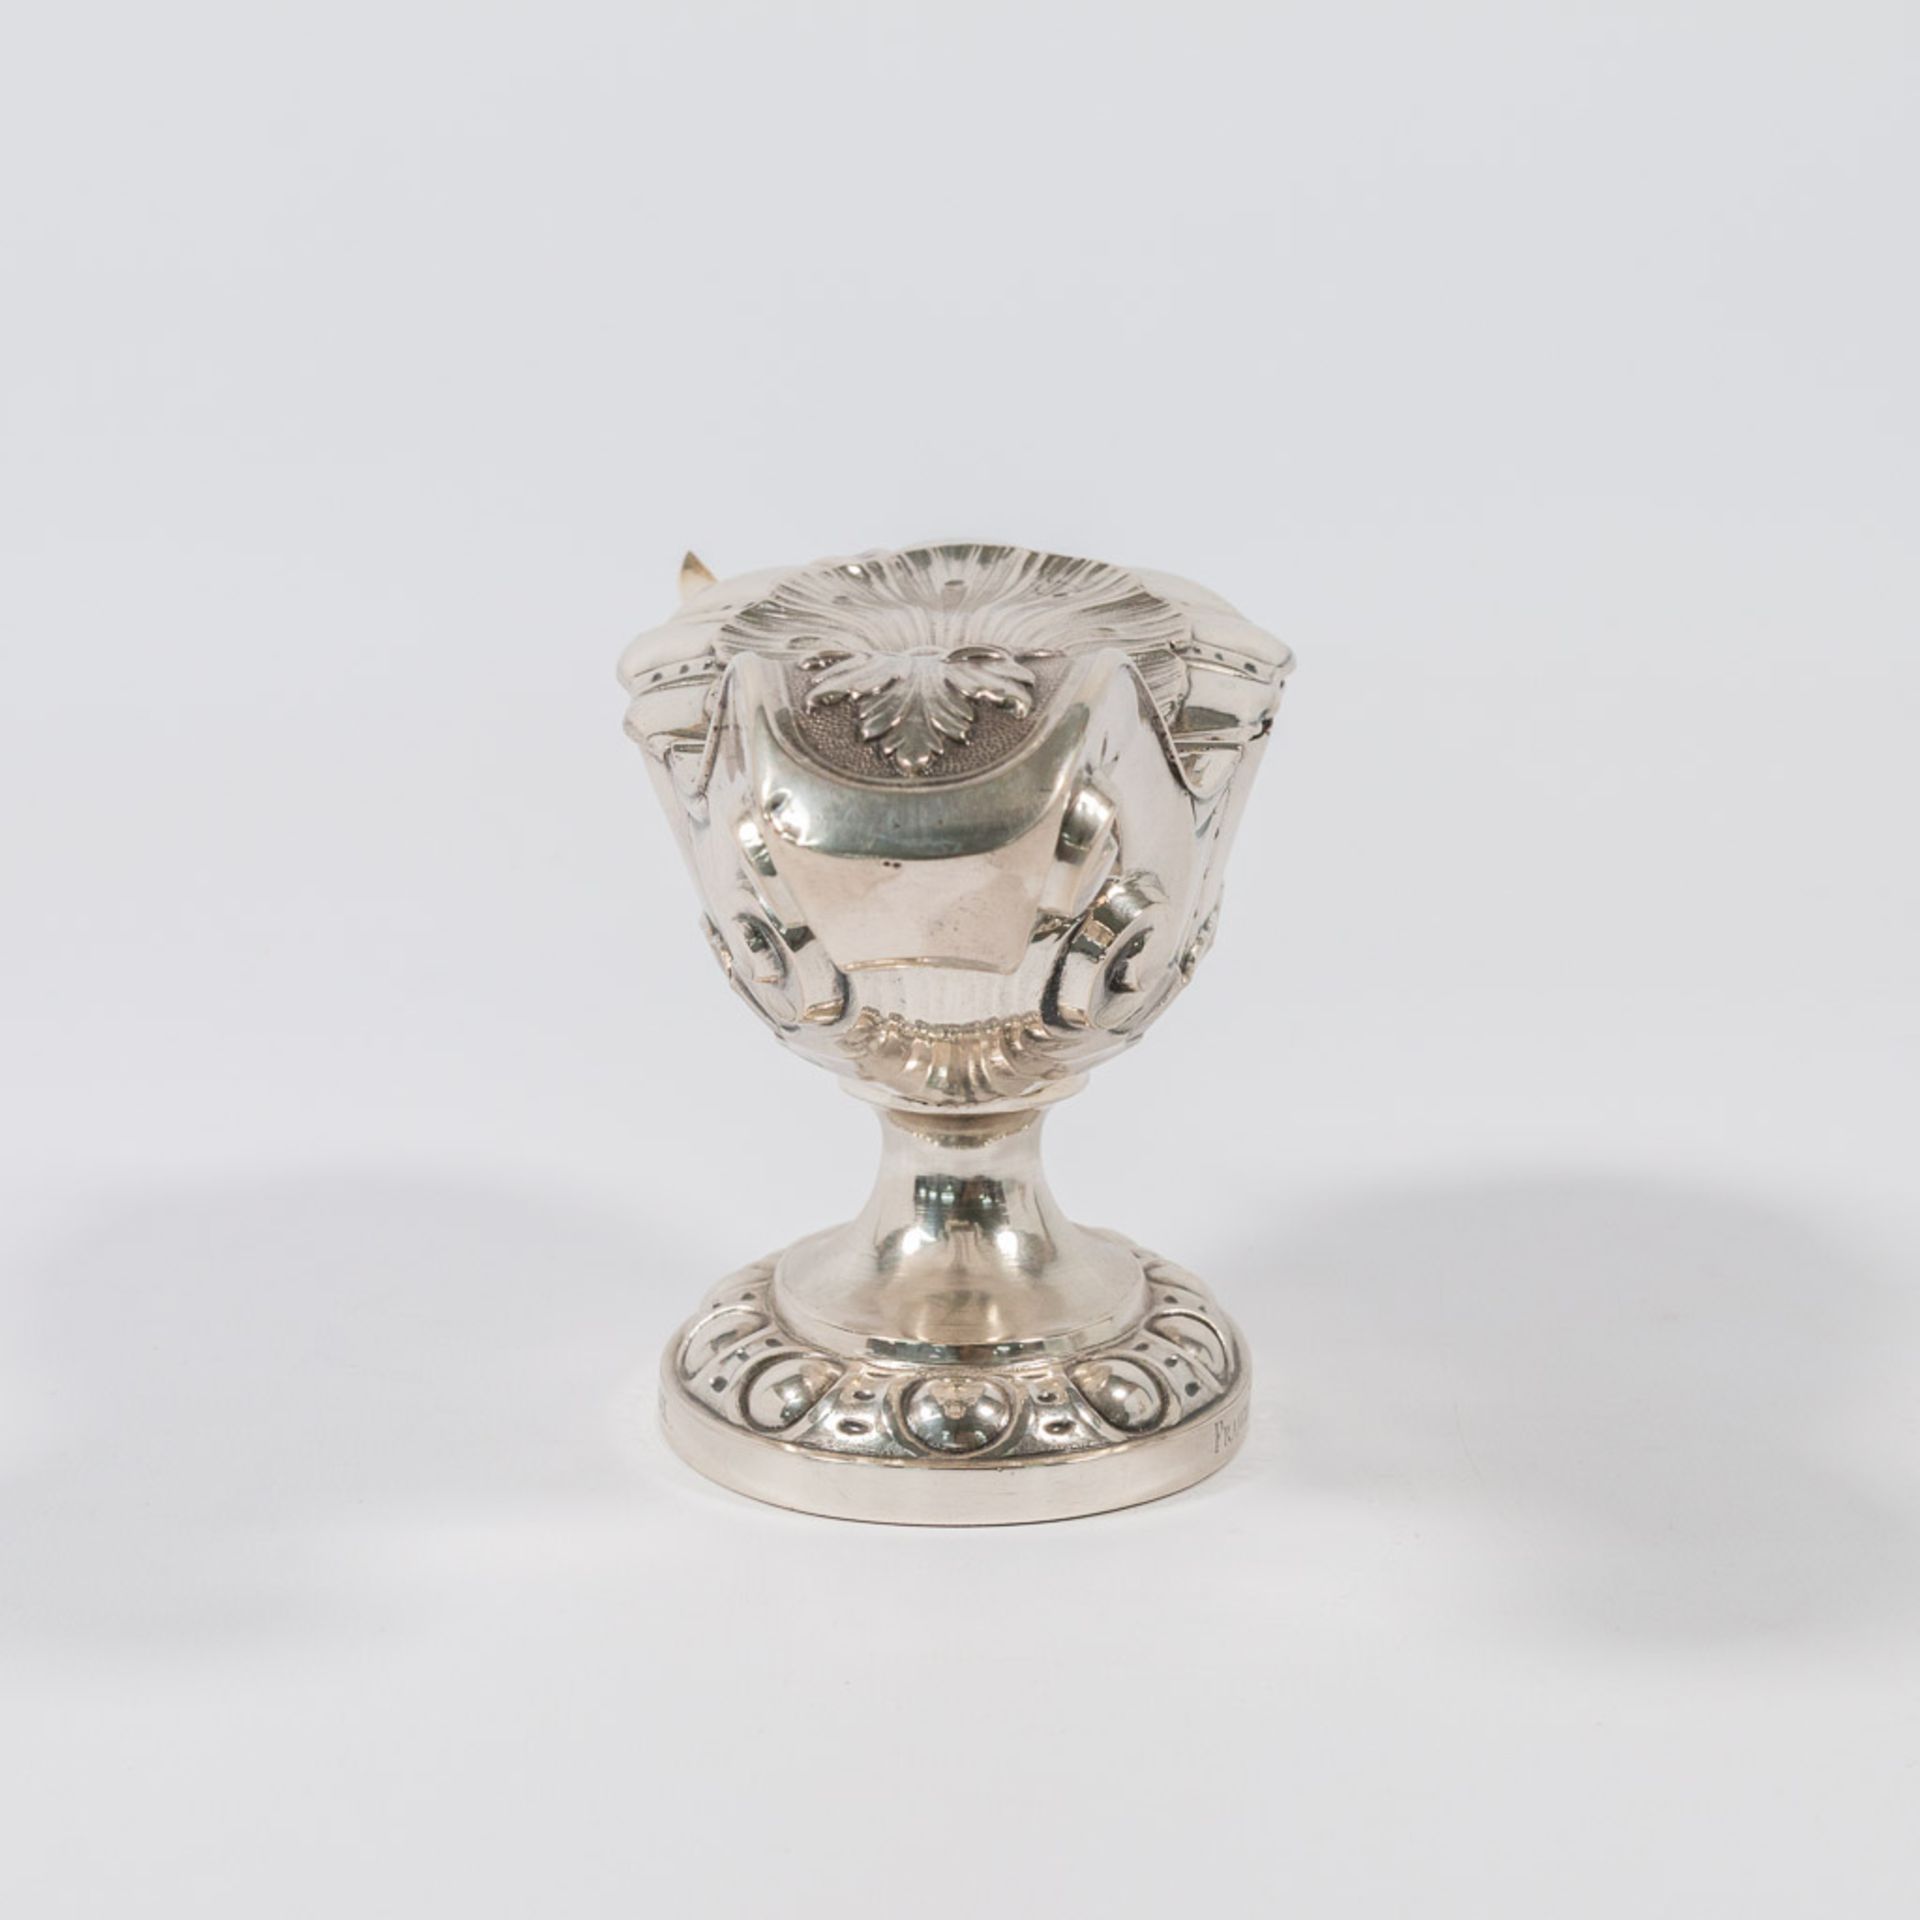 A silver Insence burner and Insence jar. - Image 2 of 39